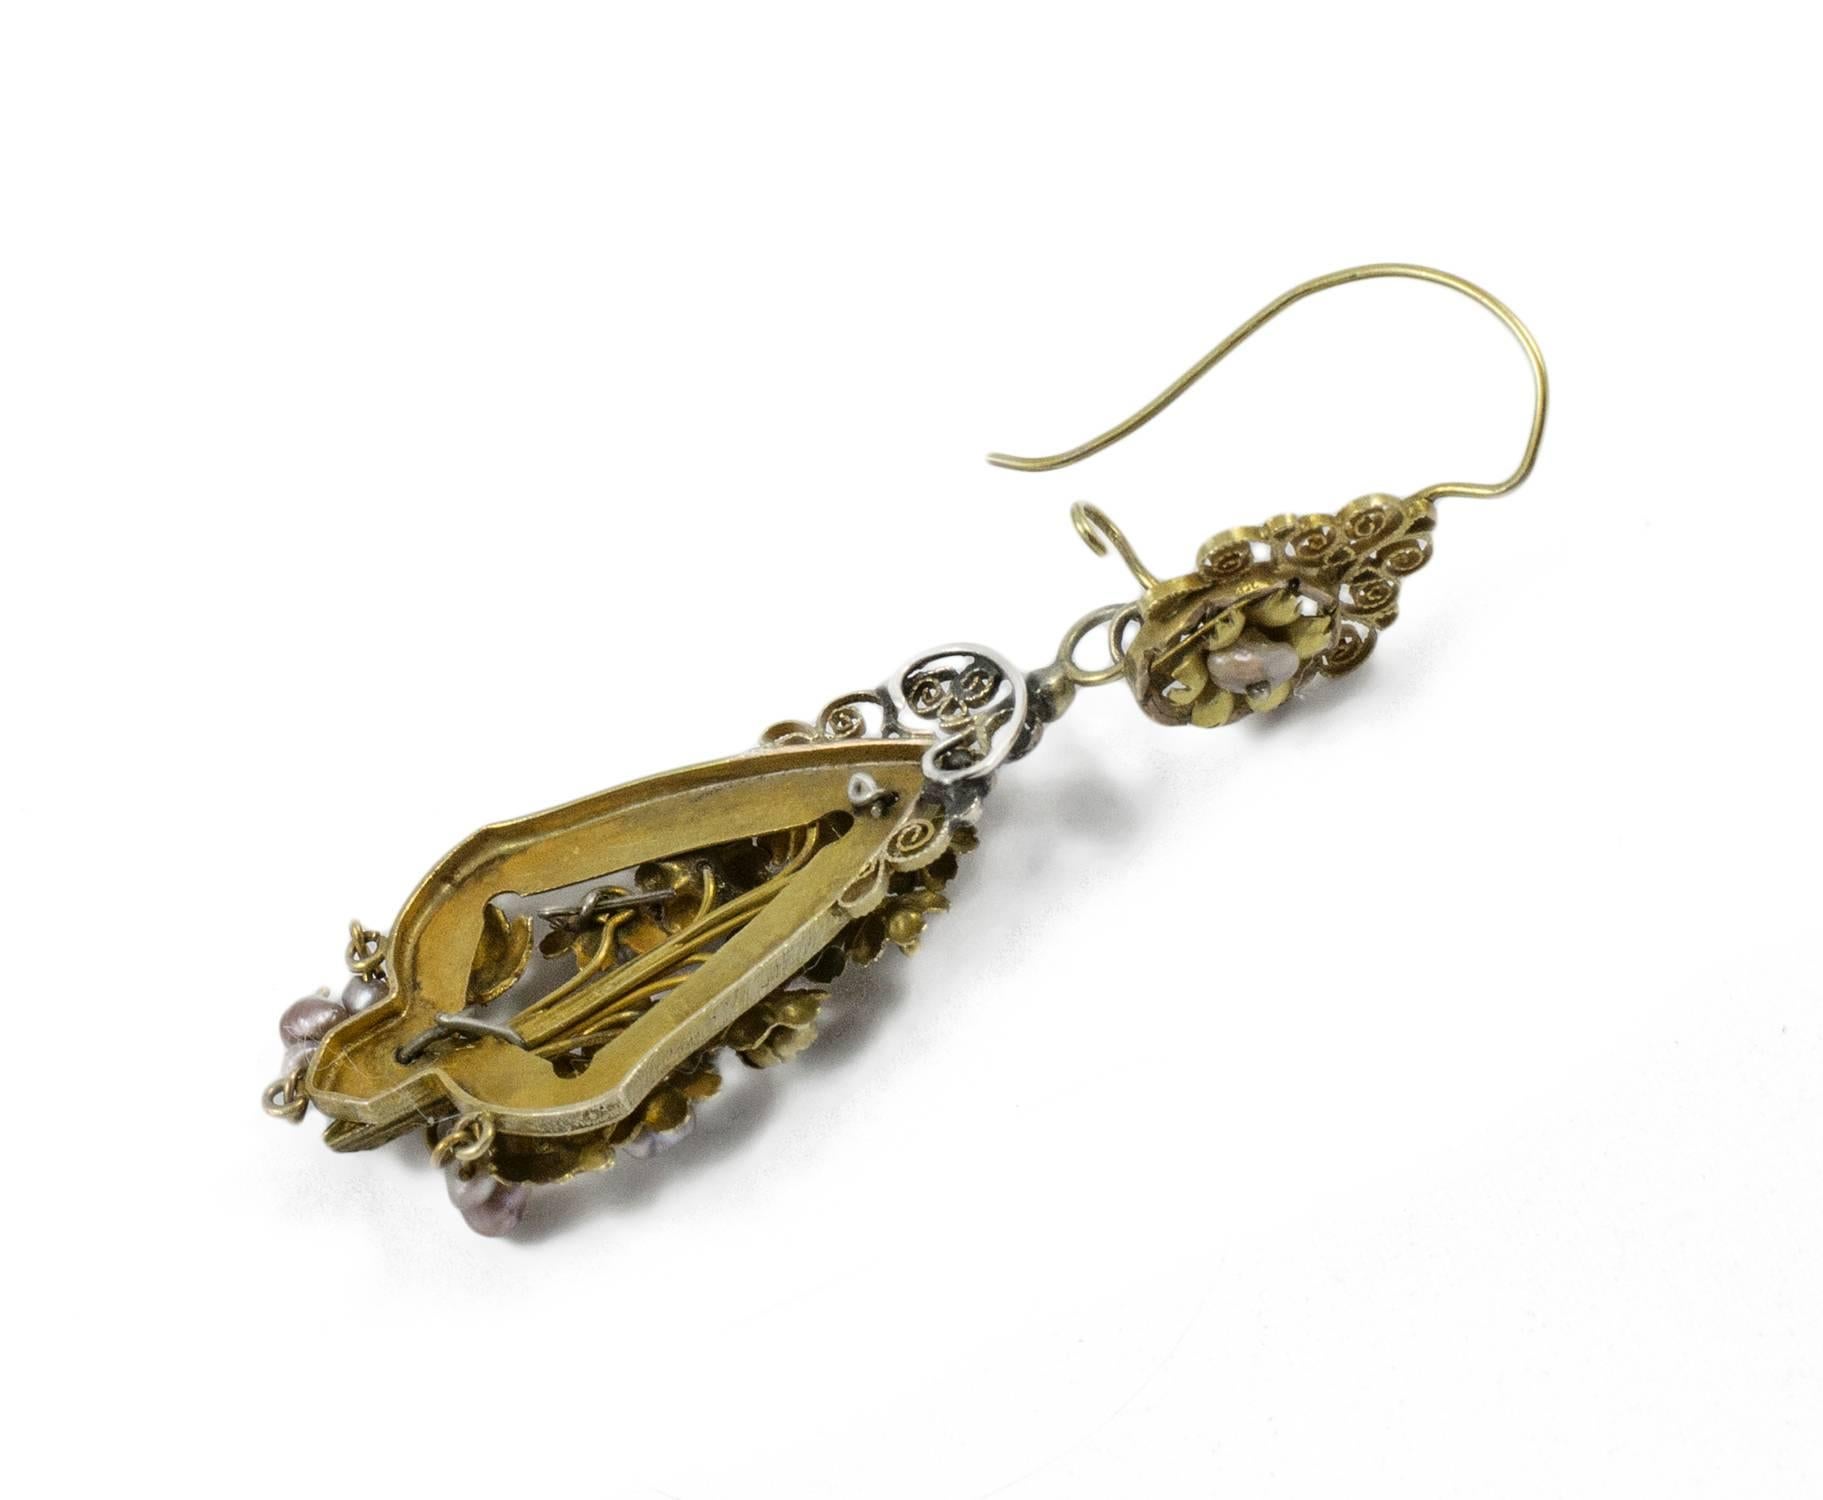 A exceptional pair of Antique 'Day and Night' earrings. Completely hand made in 12k gold designed with hand made gold flowers and foliage enhanced by tiny seed pearls. These earrings are all original. They measure approximately three inches from top